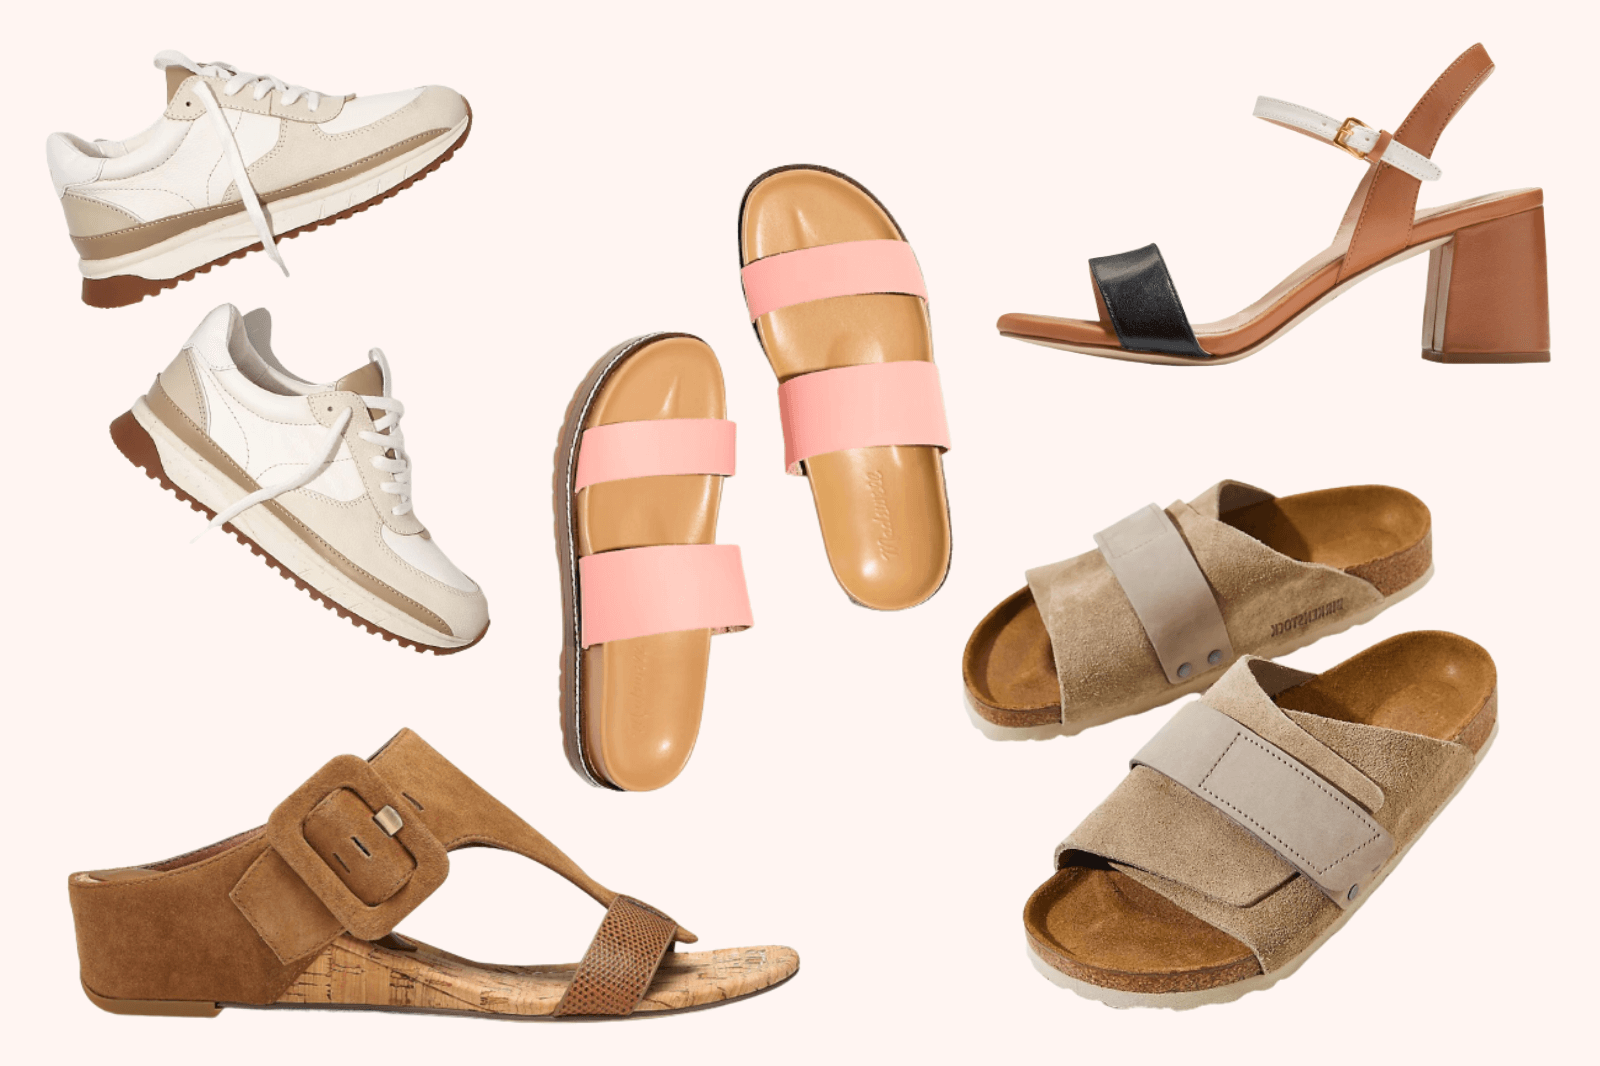 14 Comfortable (Yet Chic) Shoes for Travel